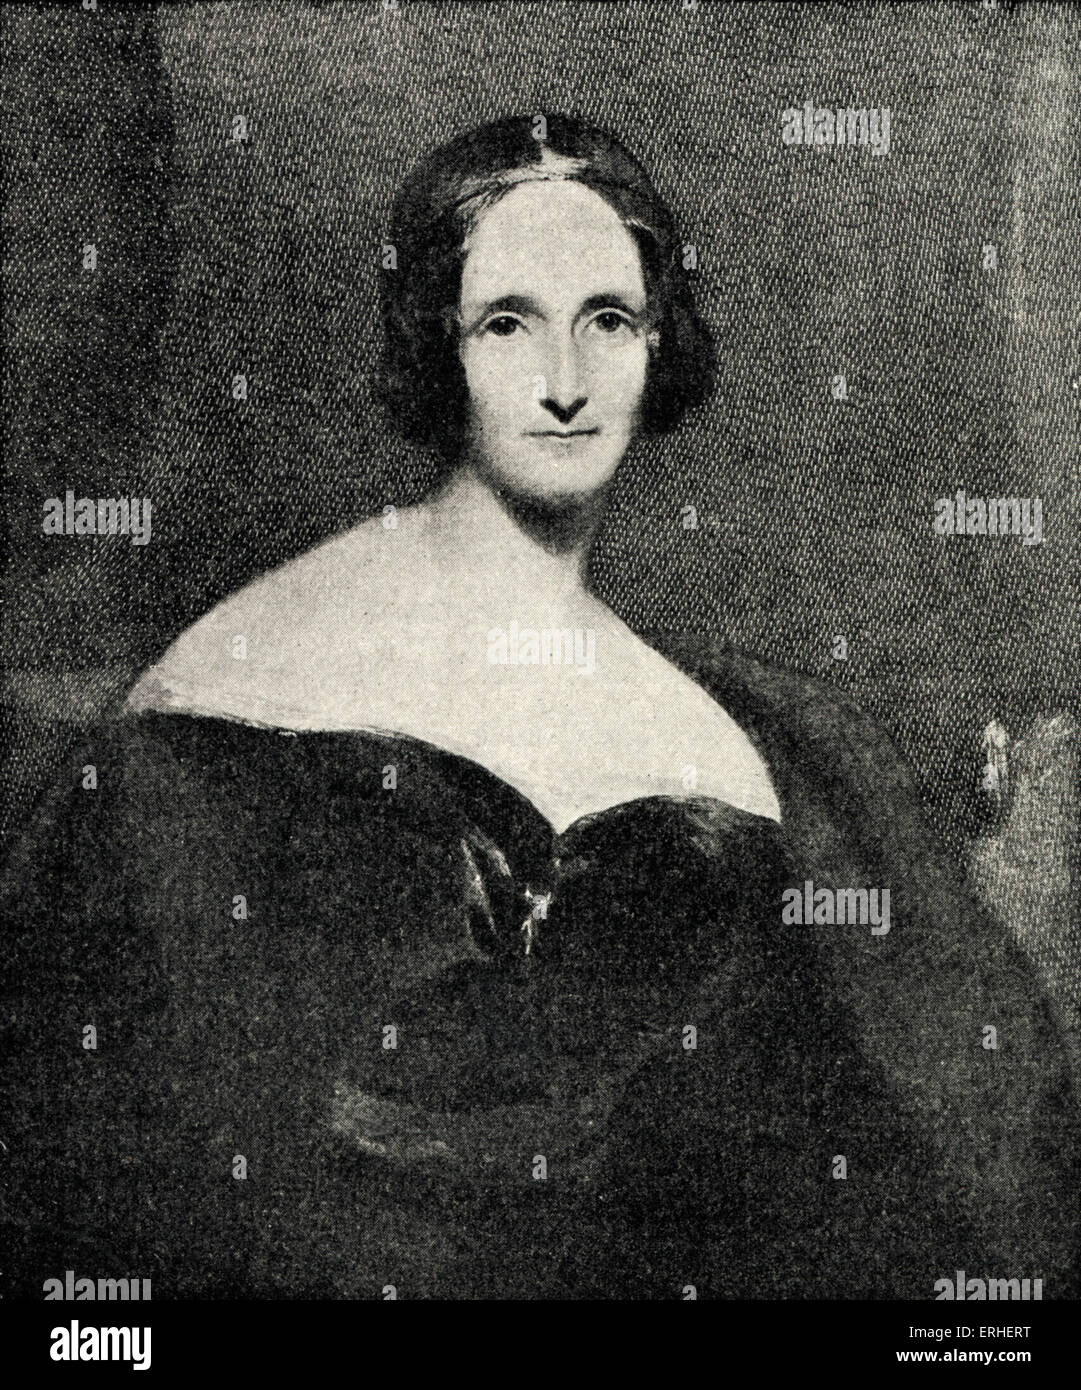 Mary Wollstonecraft Shelley - portrait. British author, 1797 - 1851.  Author of Frankenstein.  Married to Percy B Shelley. Stock Photo